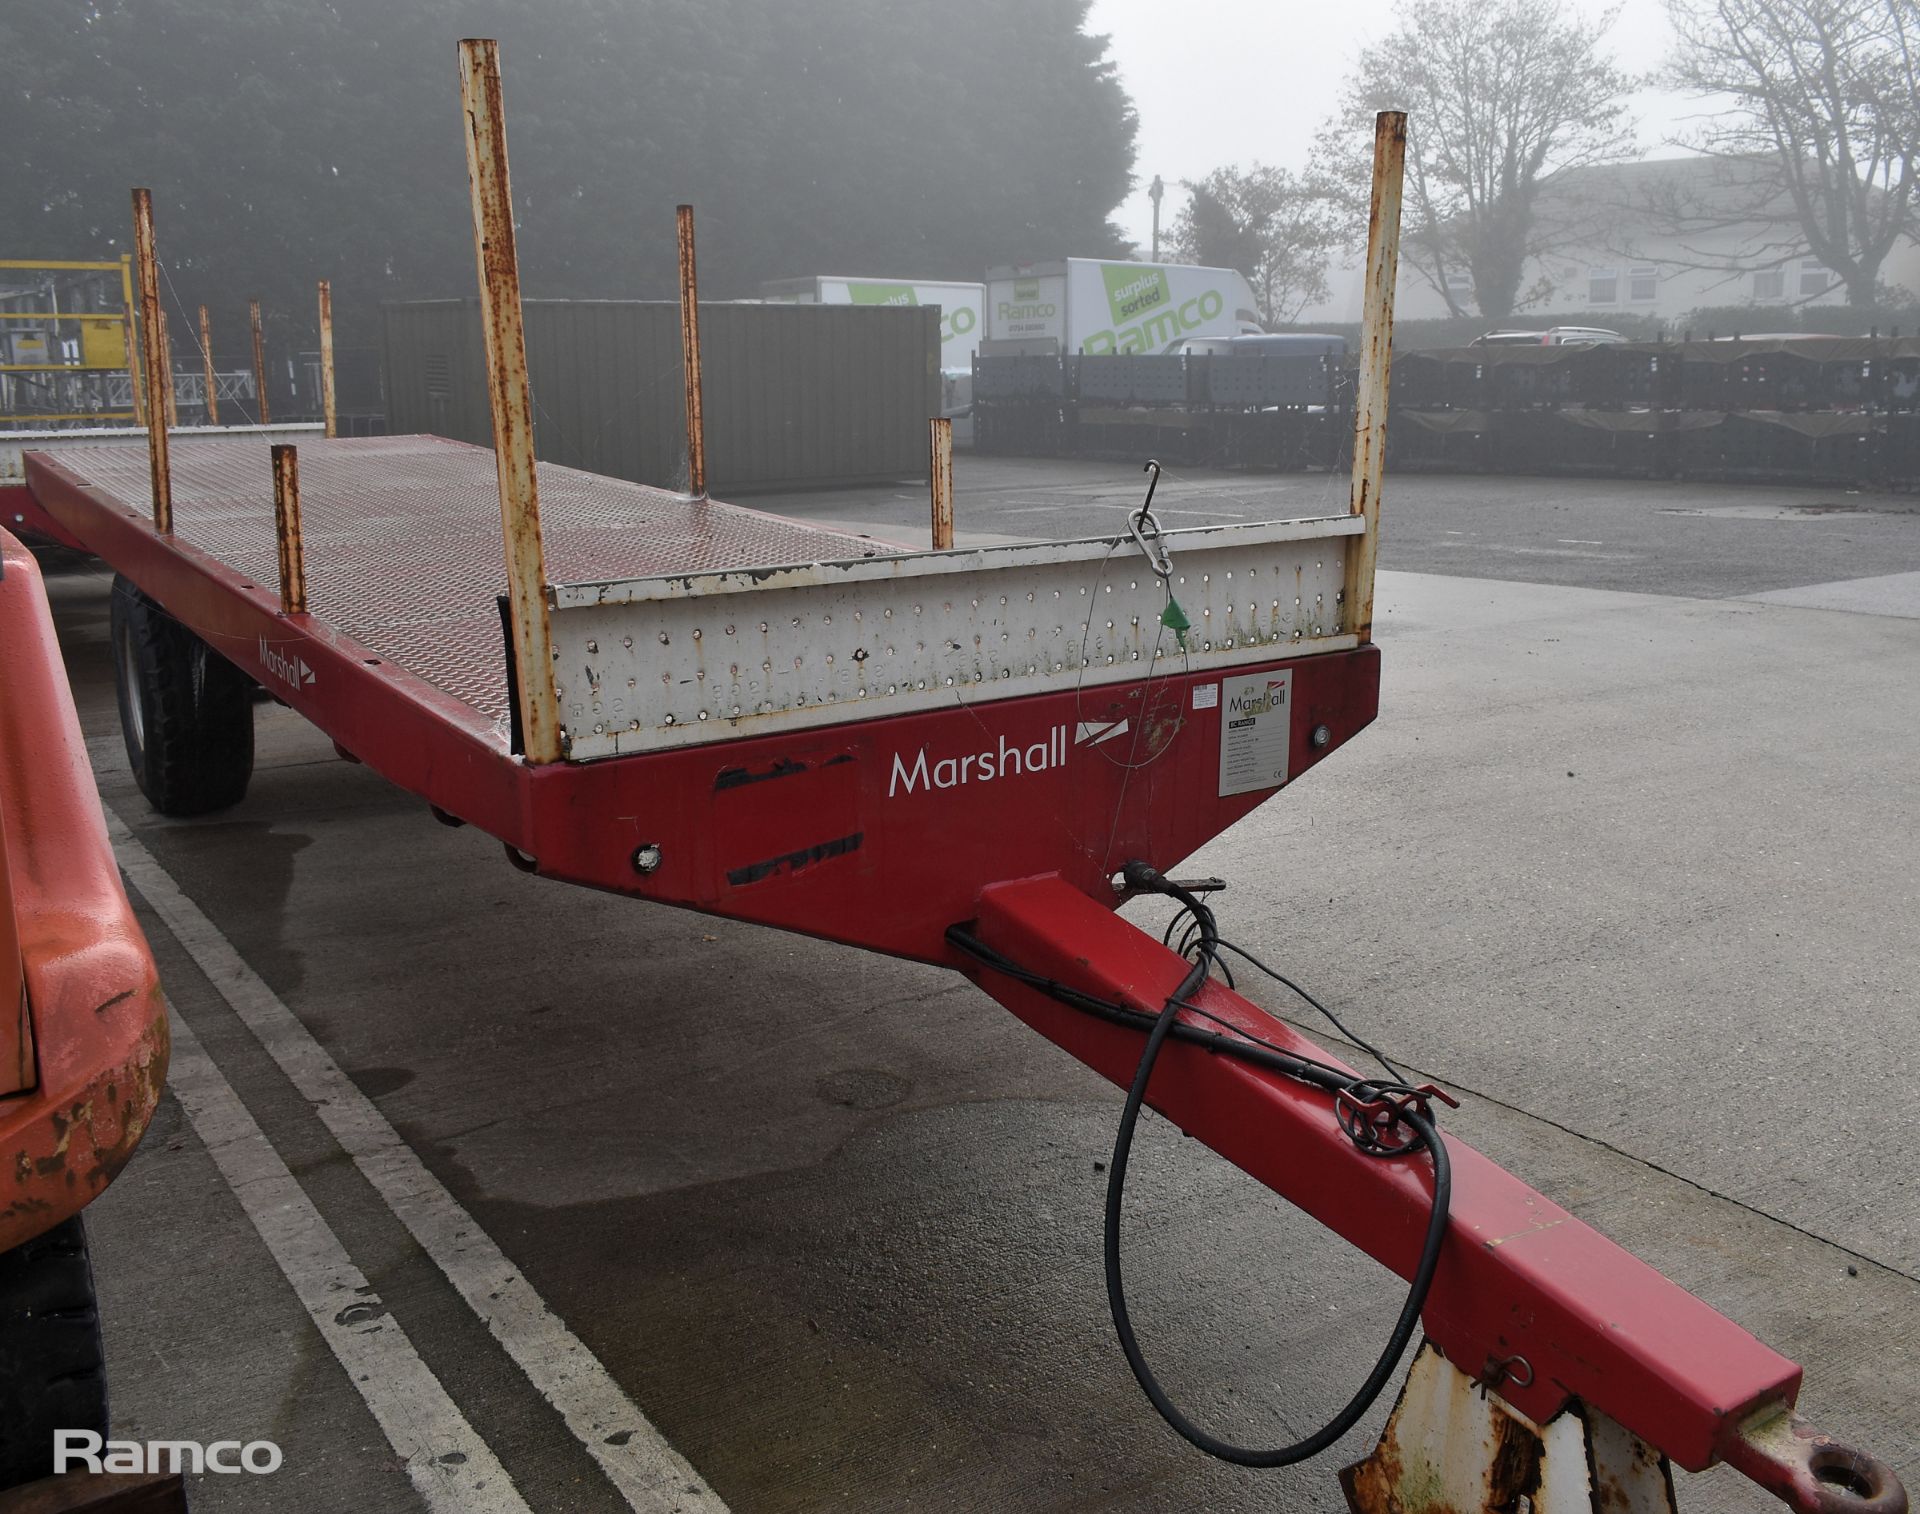 Marshall BC18N 2019 single axle flatbed trailer - 5000kg carrying capacity - serial number 107532 - Bild 9 aus 11